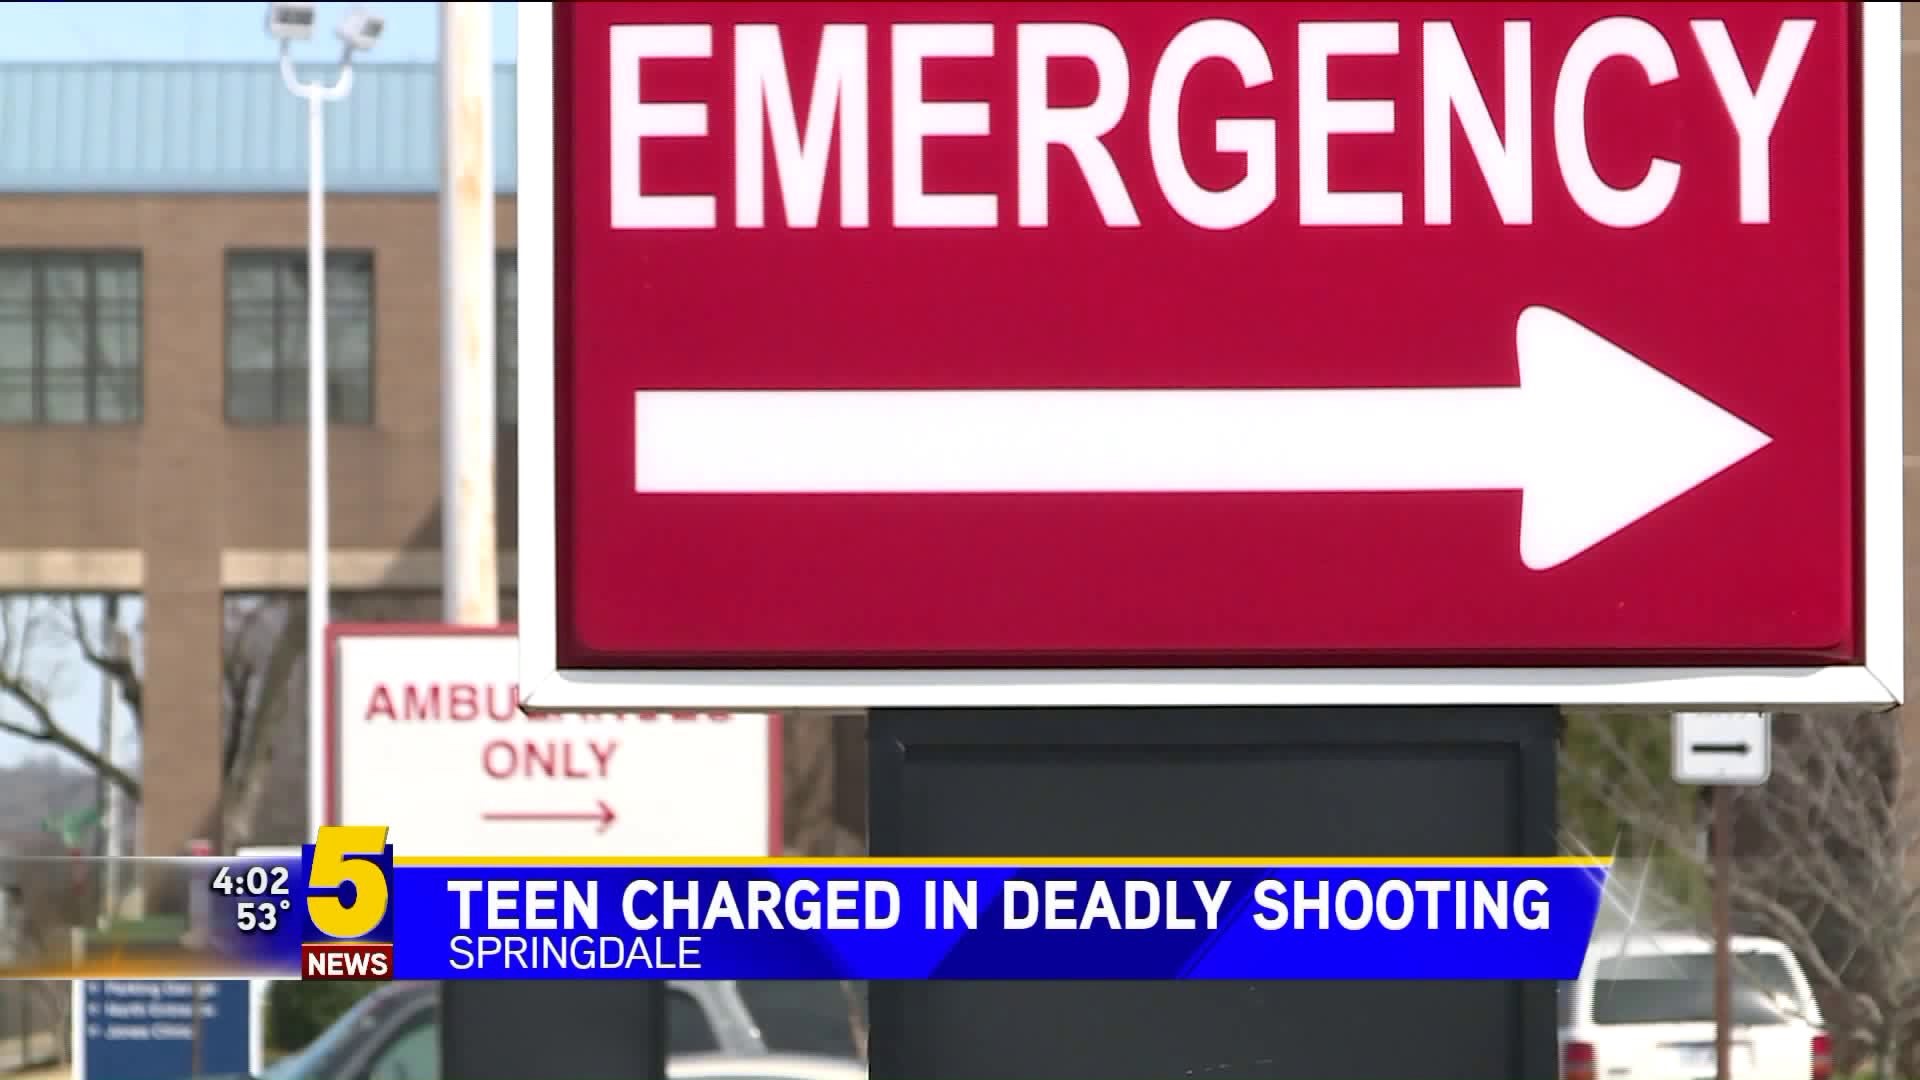 Teen Charged in Deadly Shooting